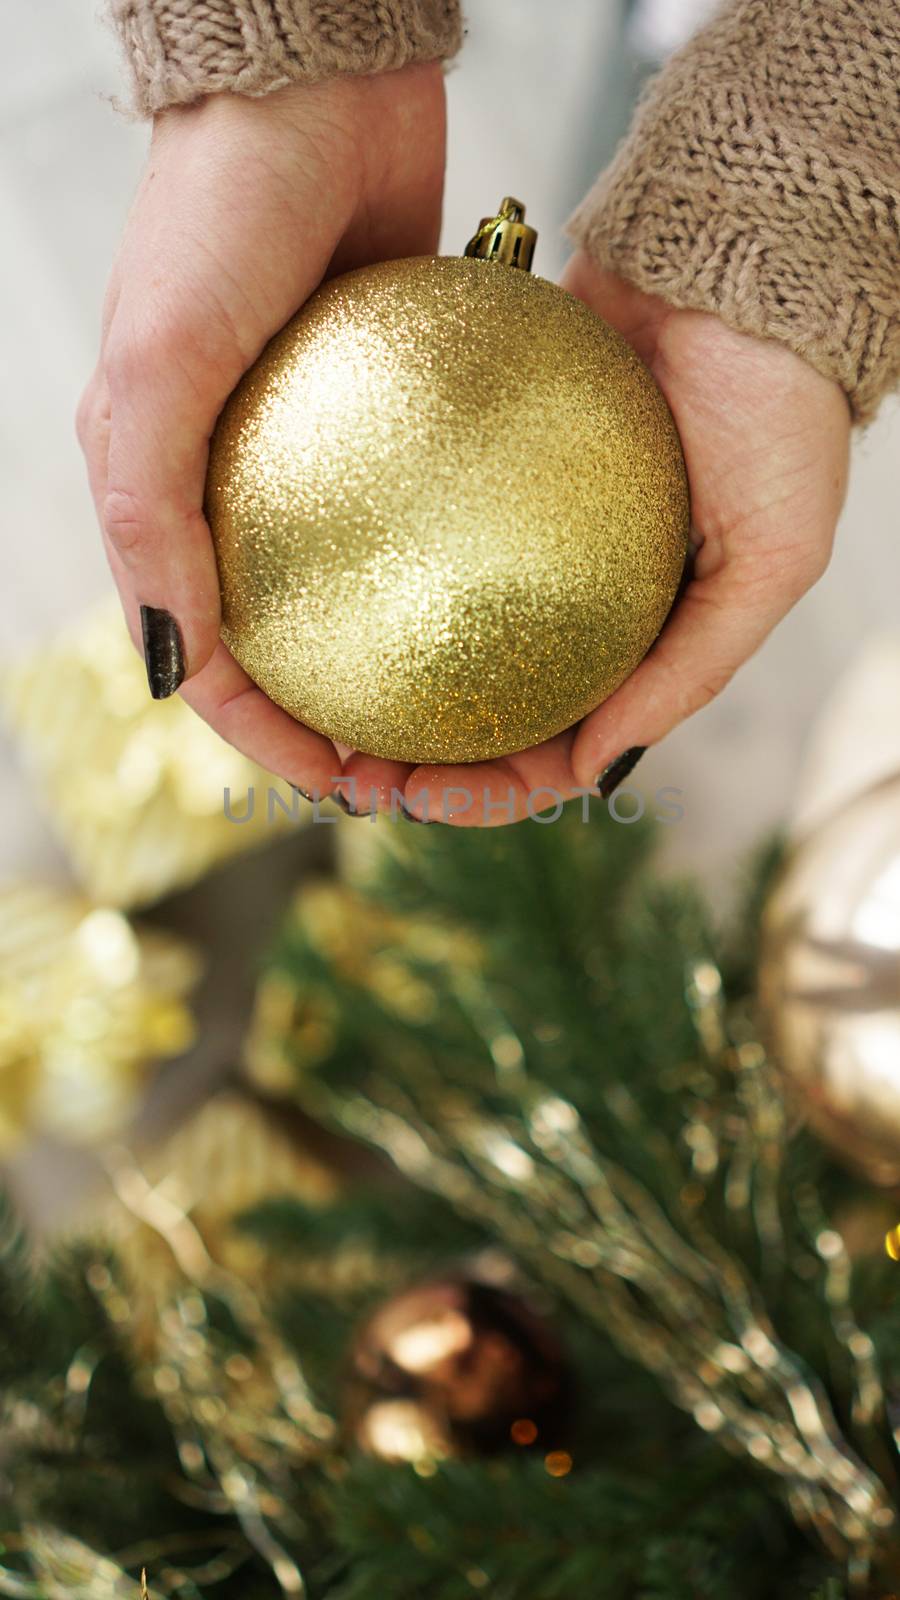 Hand holding gold ball decorations on Christmas tree background by natali_brill